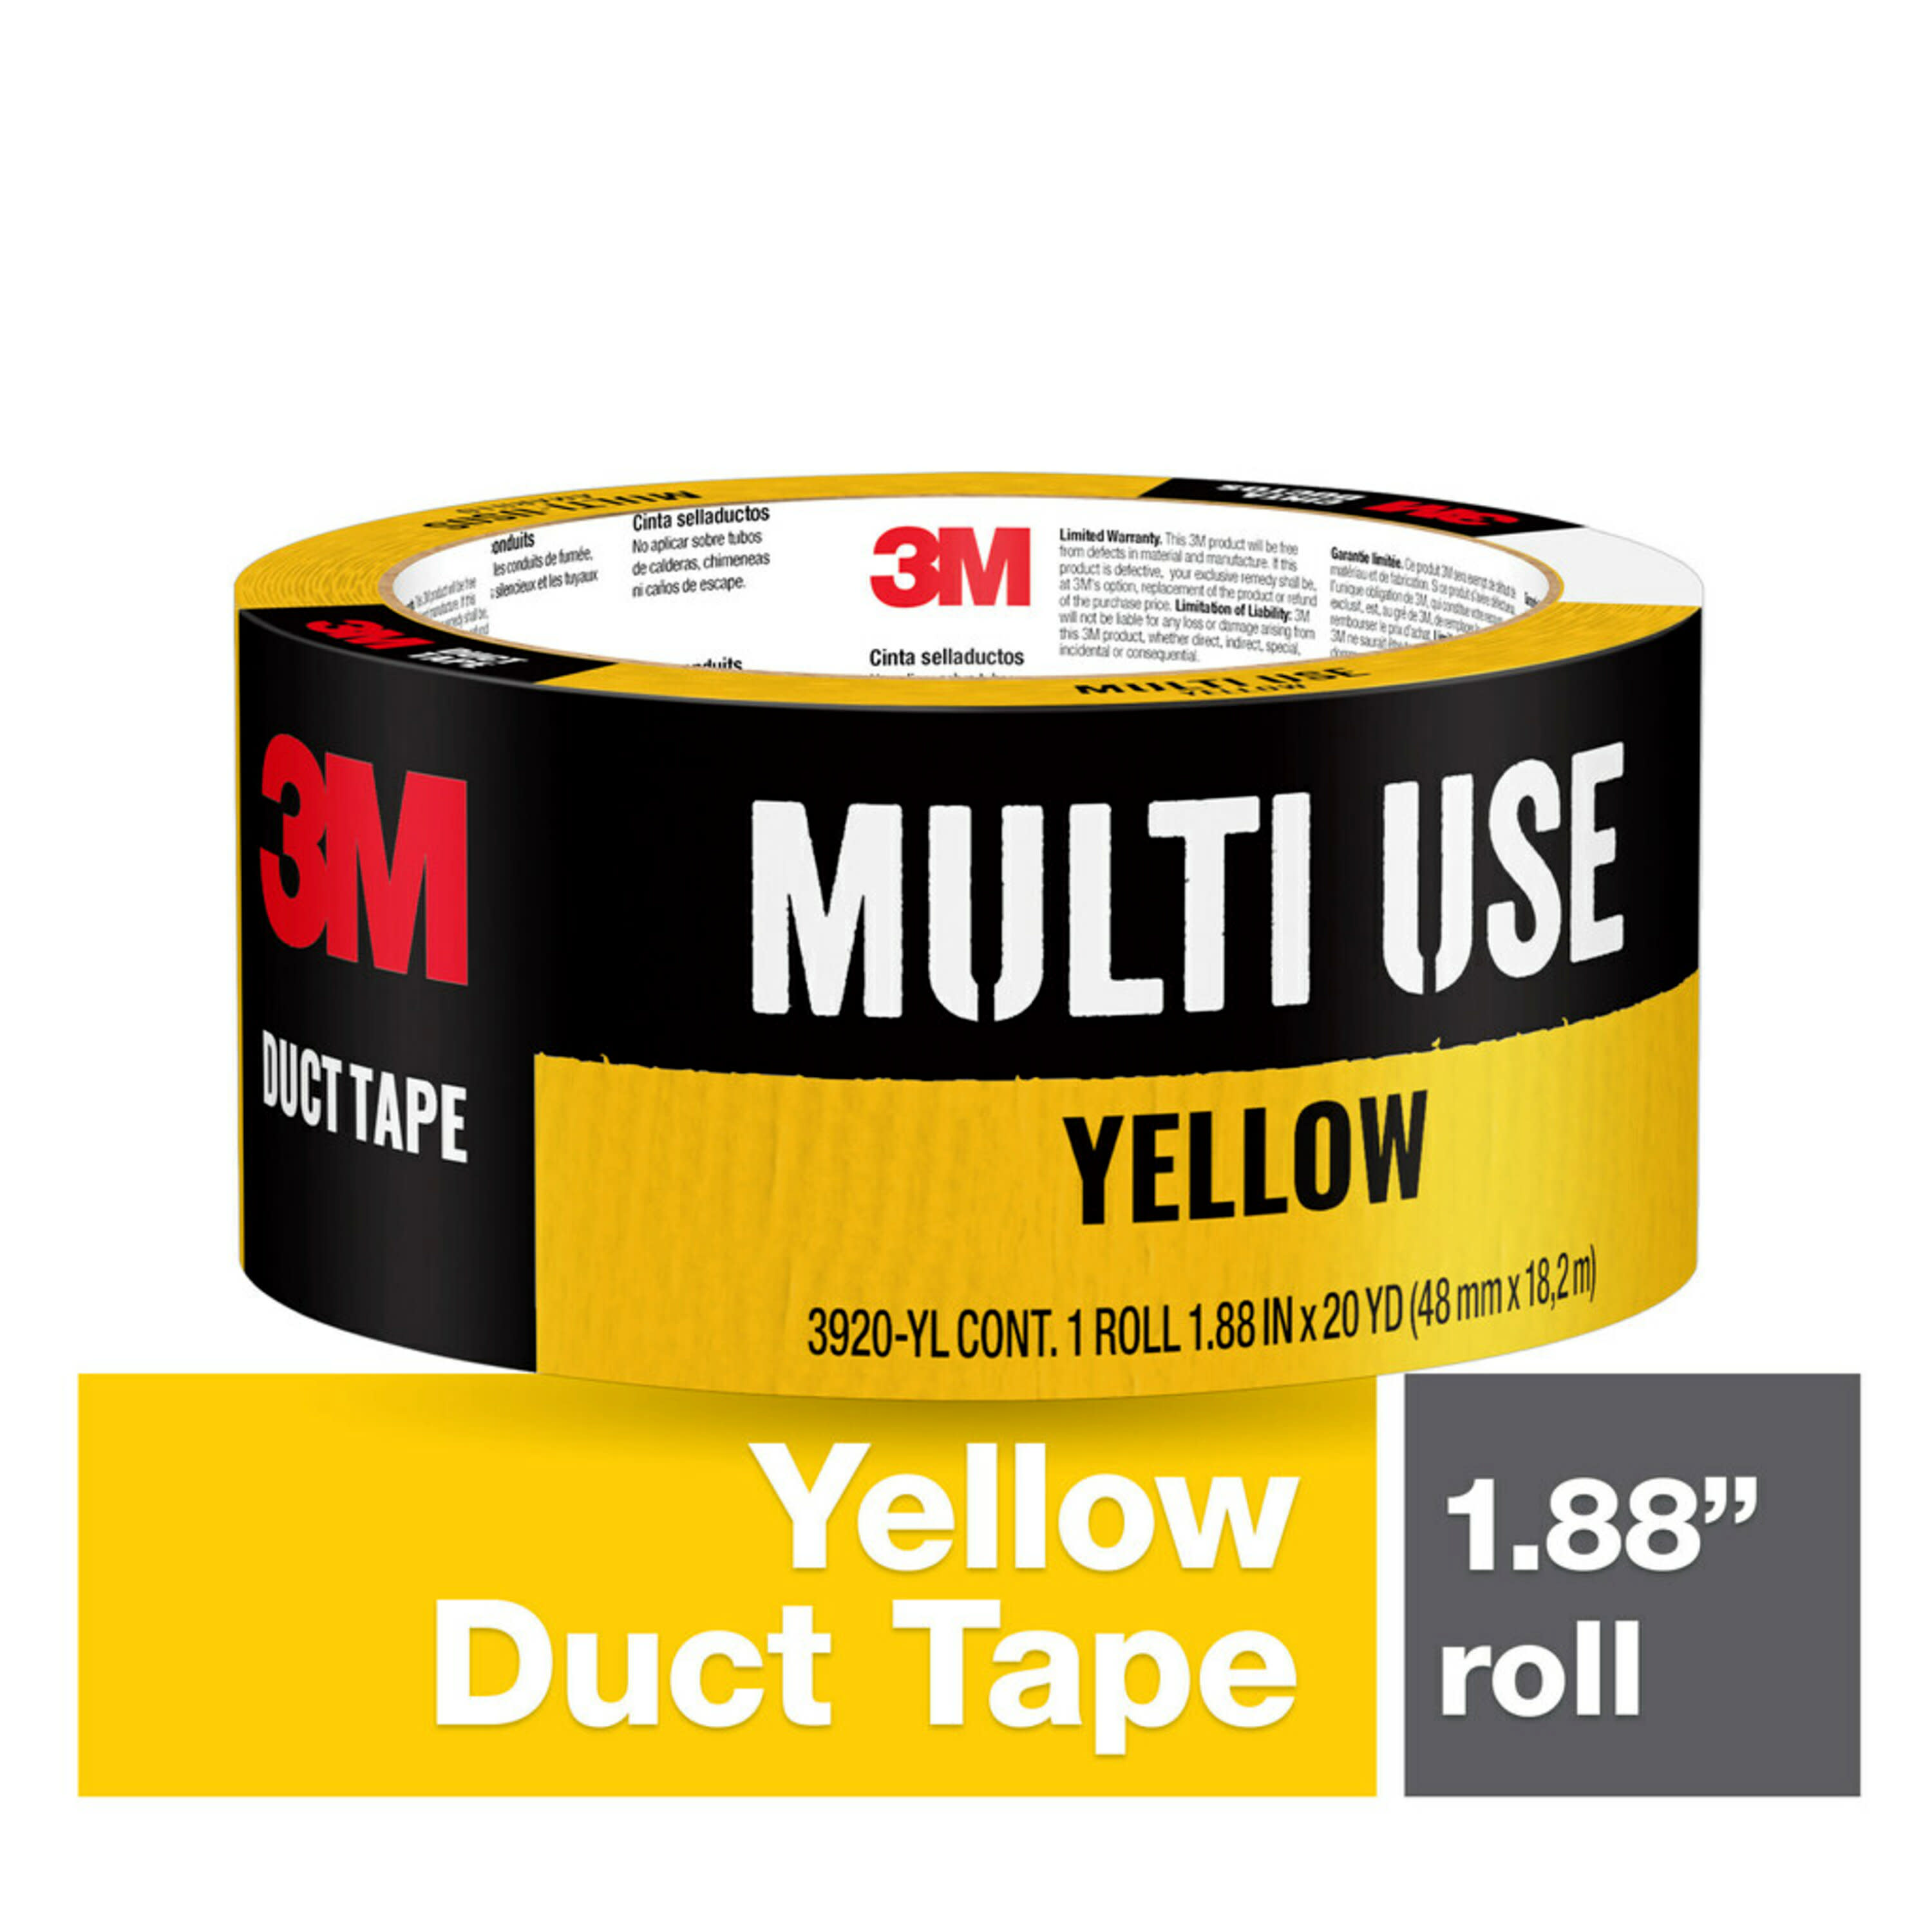 3M Heavy Duty Duct Tape:Facility Safety and Maintenance:Tapes and Adhesives